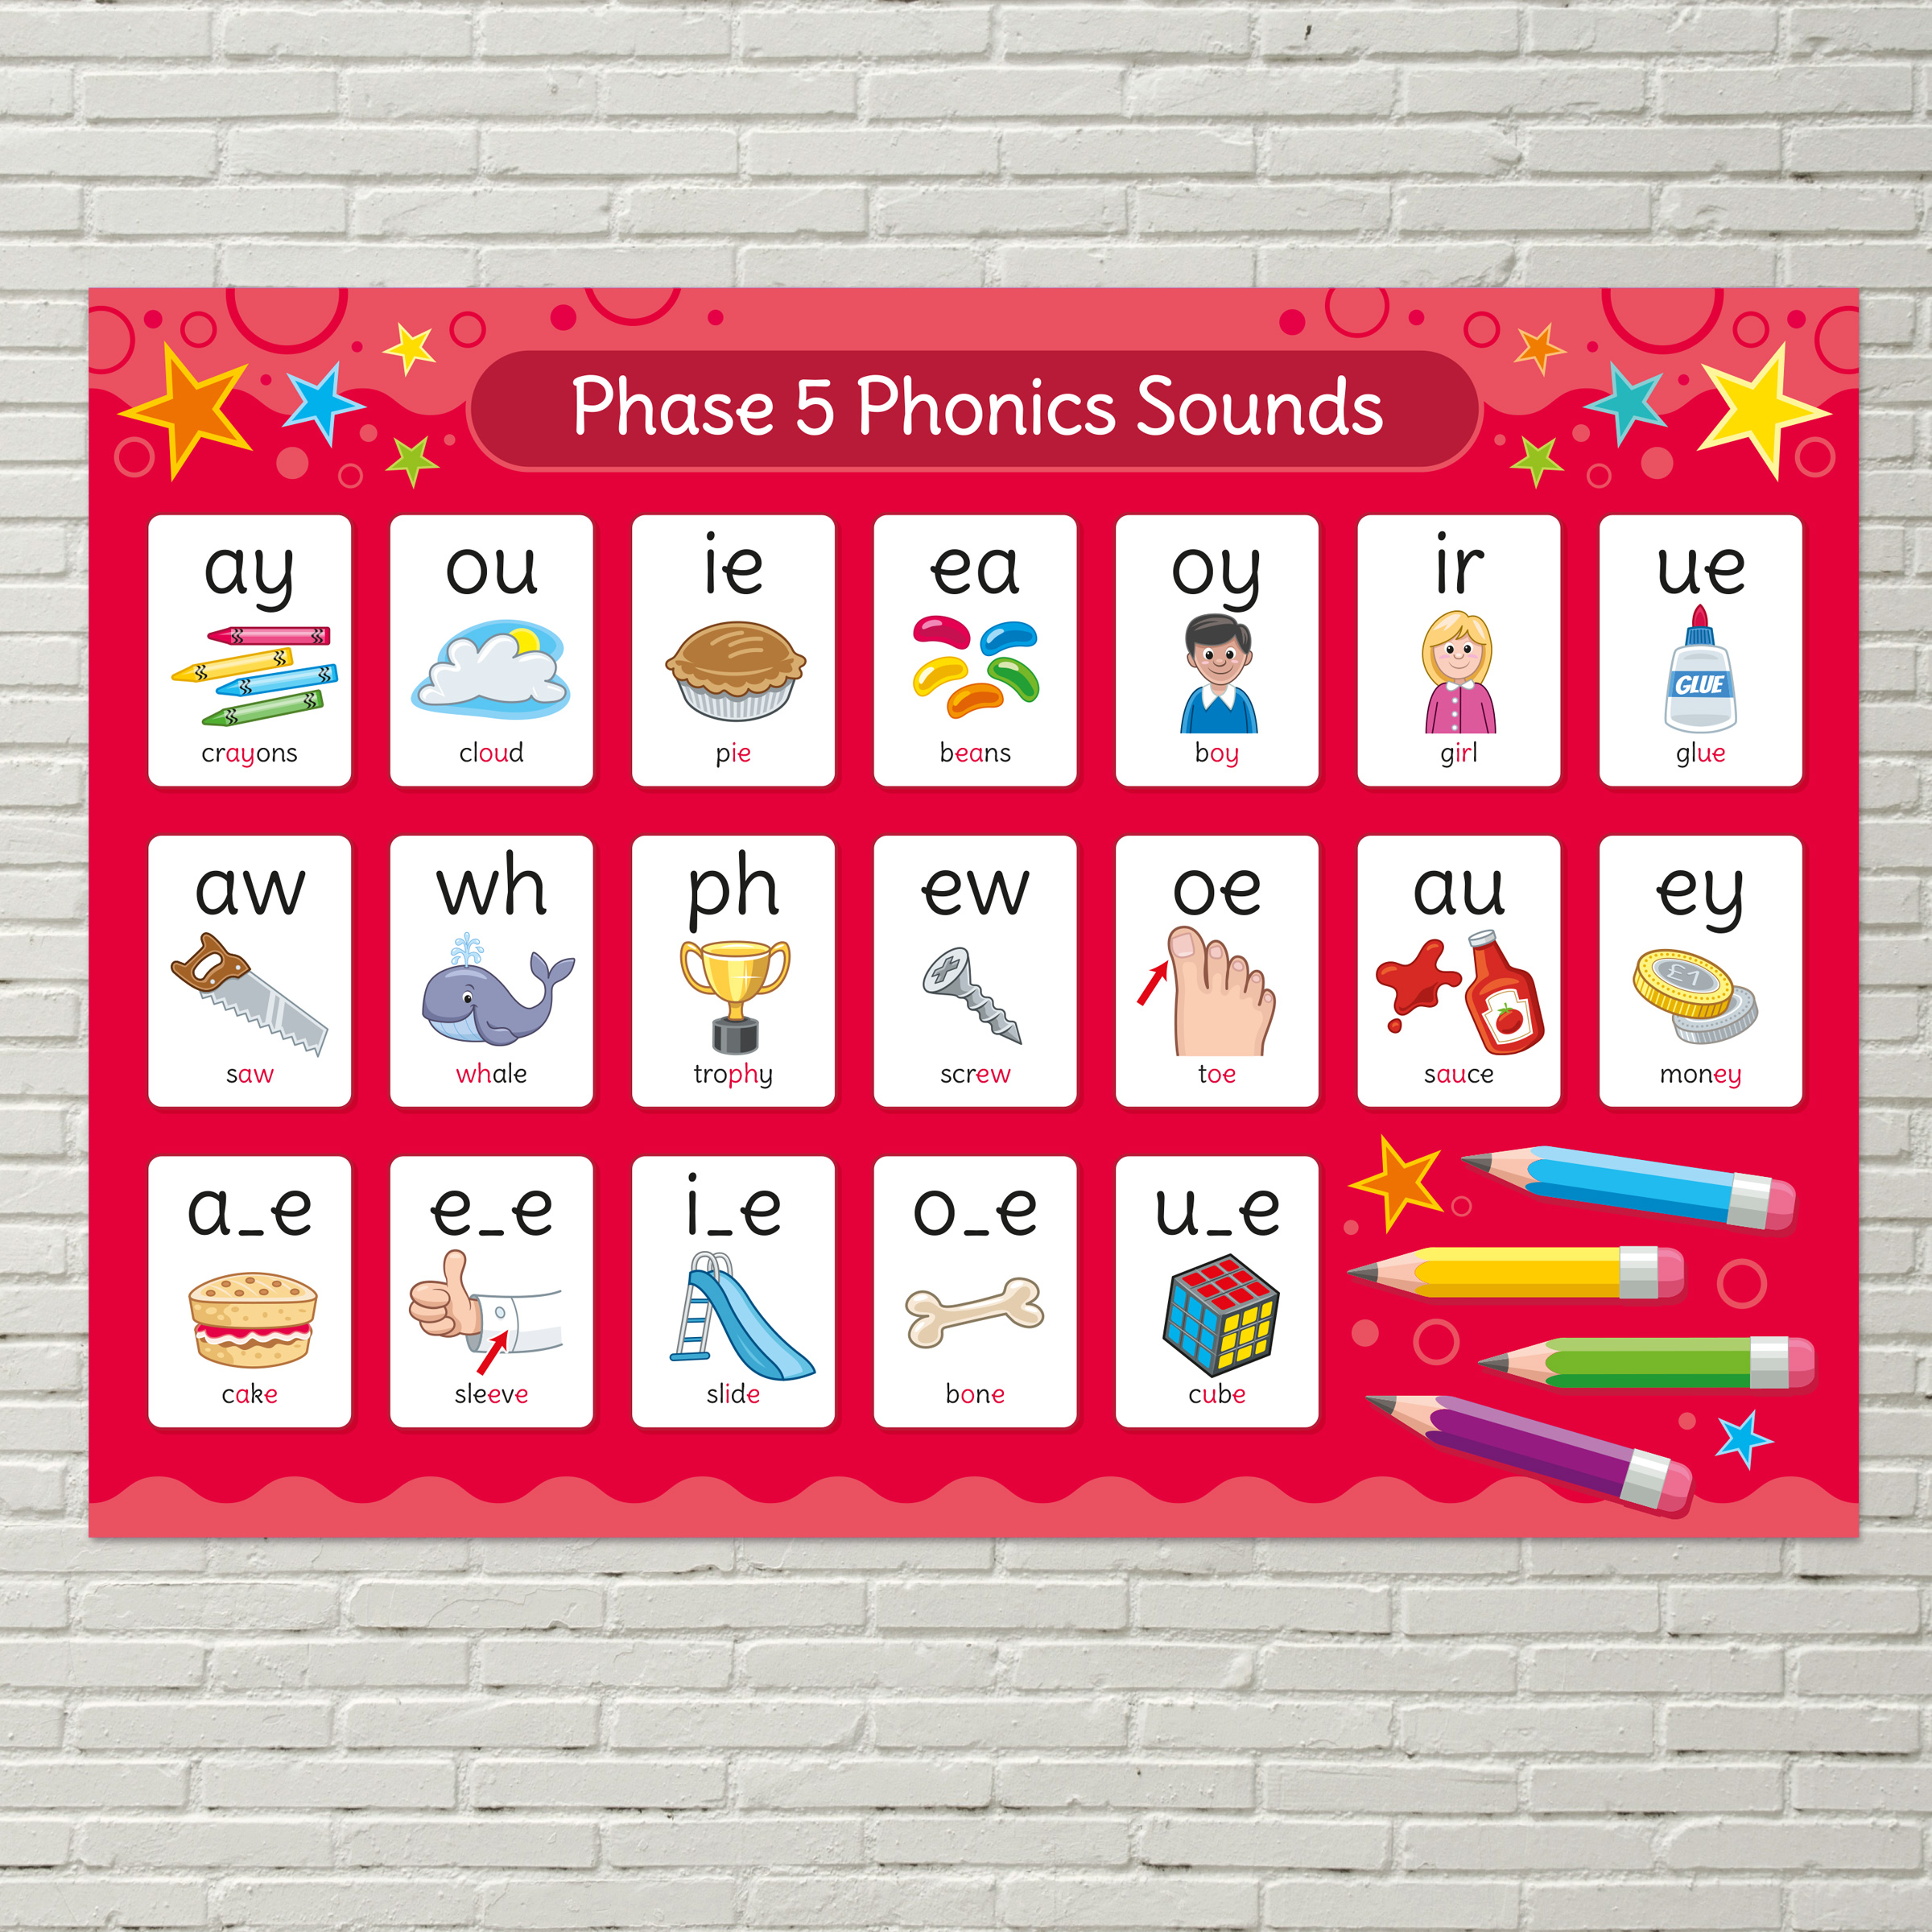 Phonics Phase 5 Sounds Poster English Poster For Schools